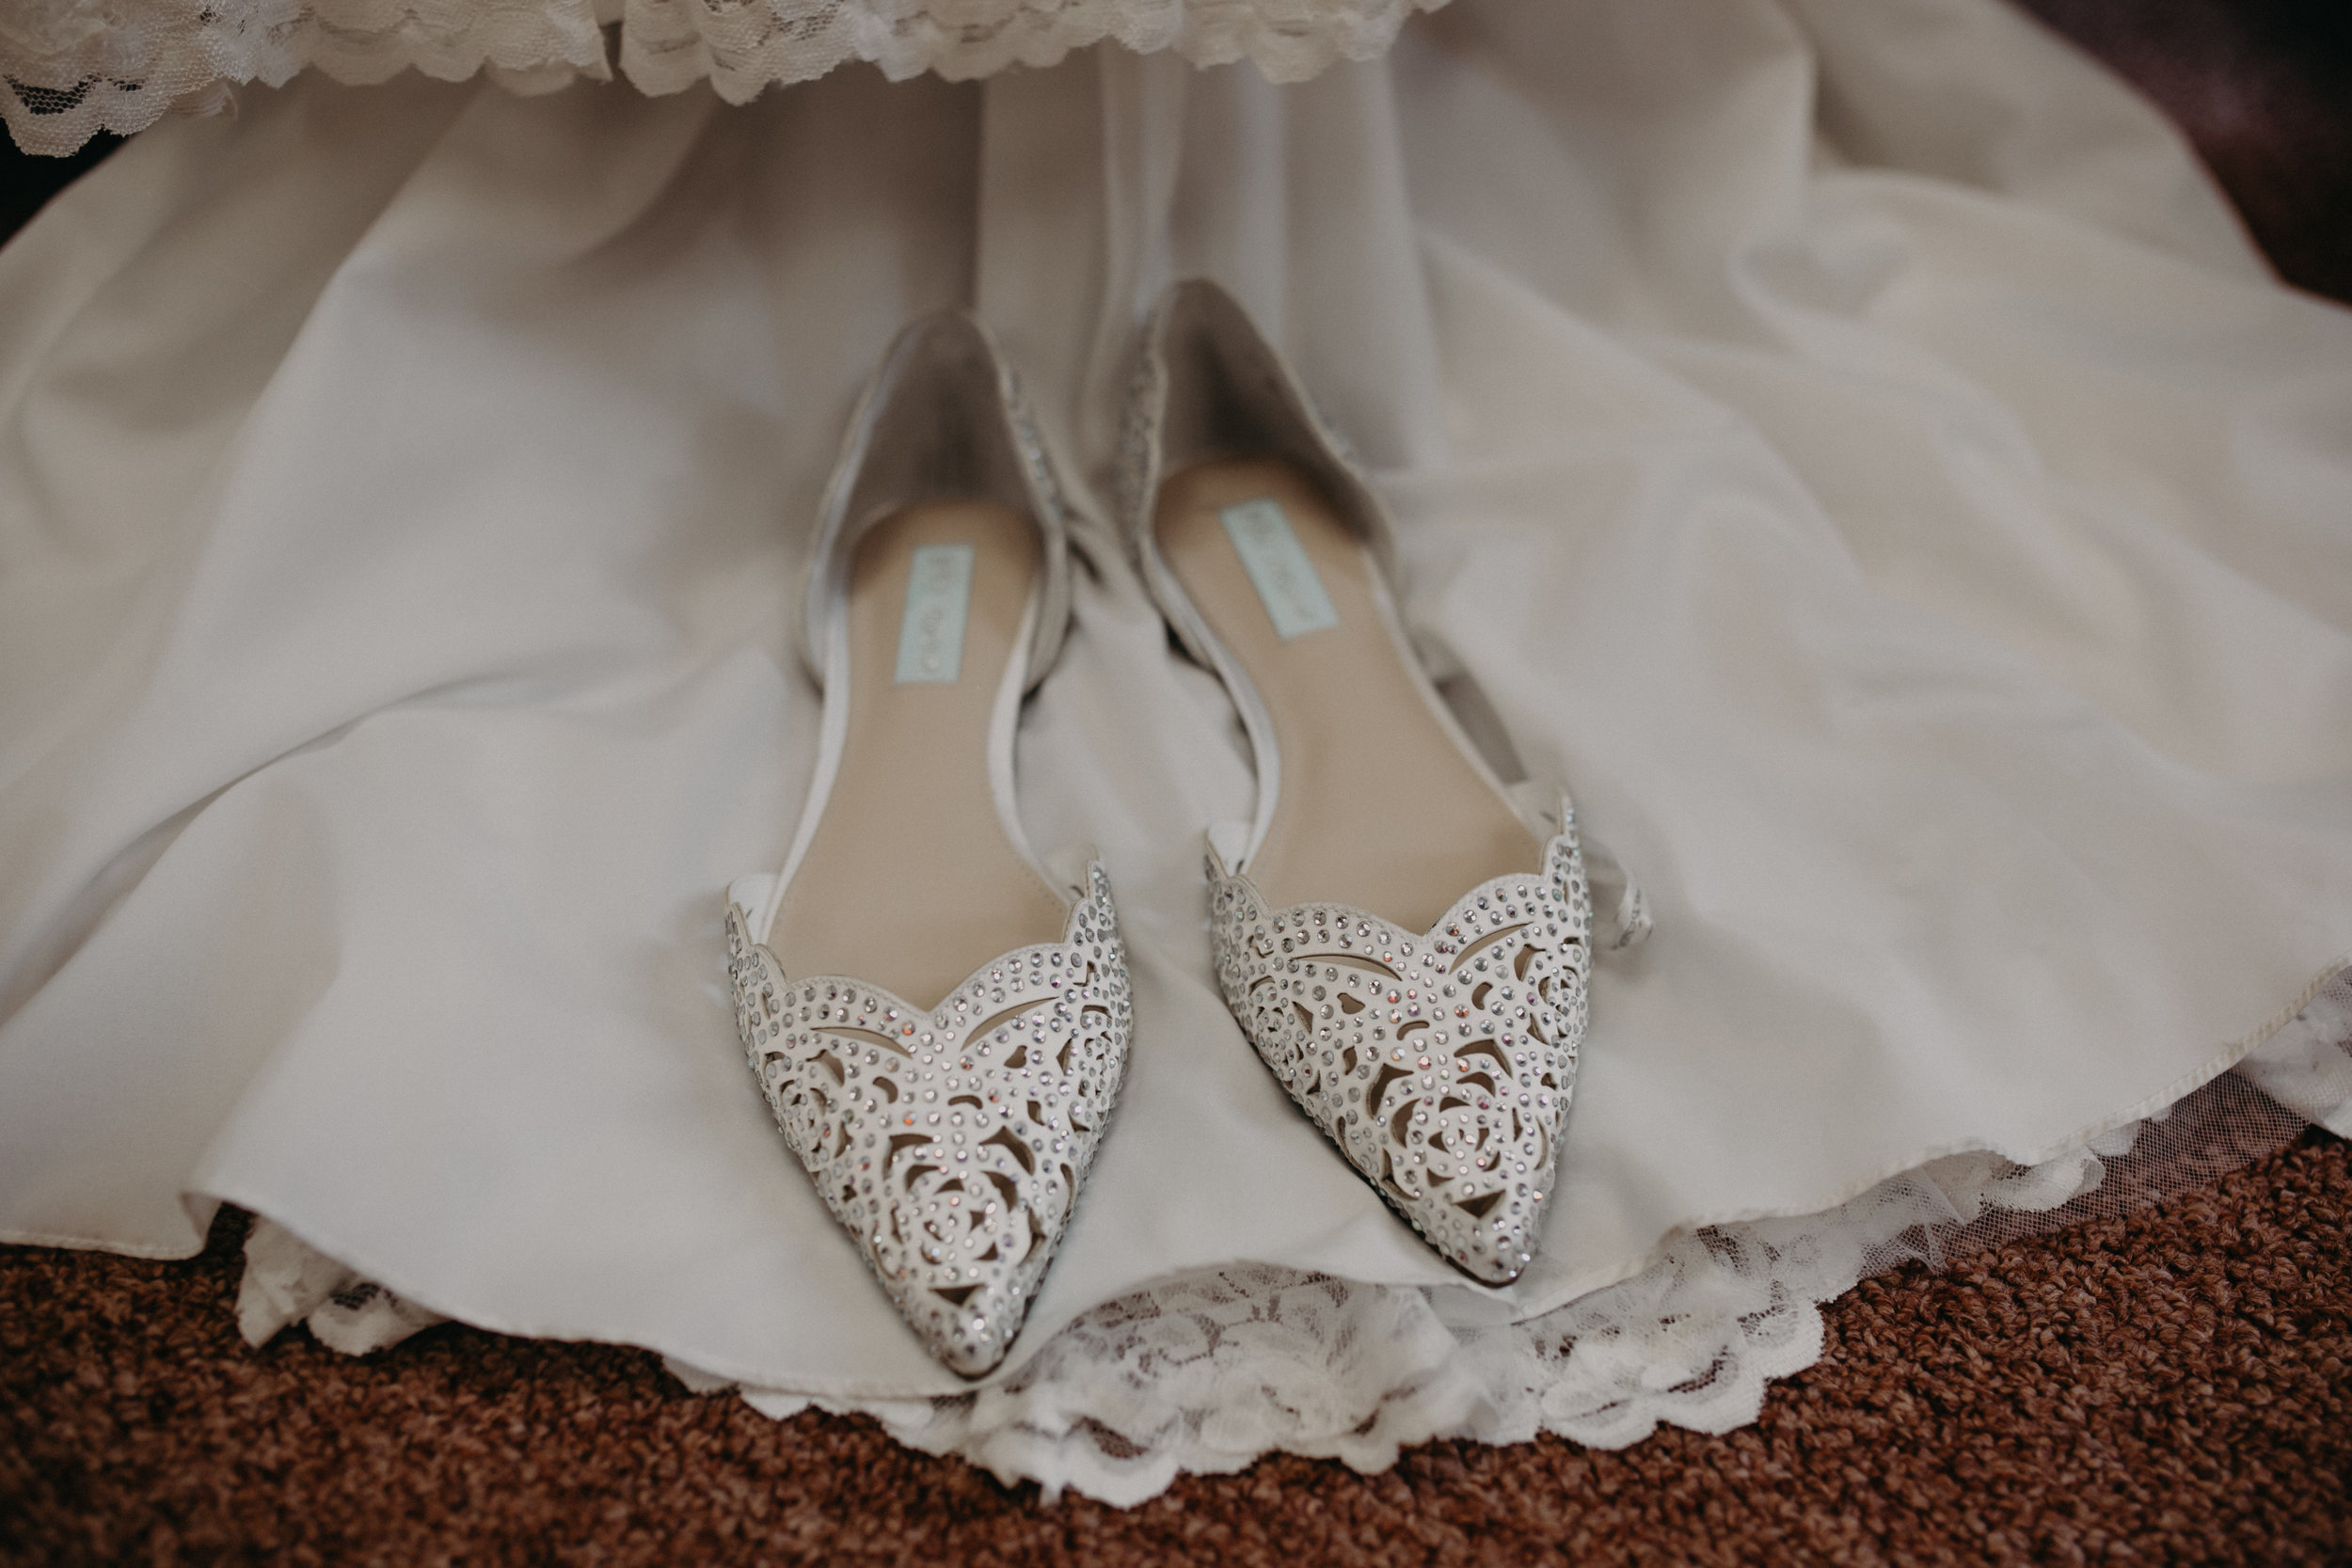  wedding flats for bride in Marshfield Wisconsin photographed by Andrea Wagner Photography 